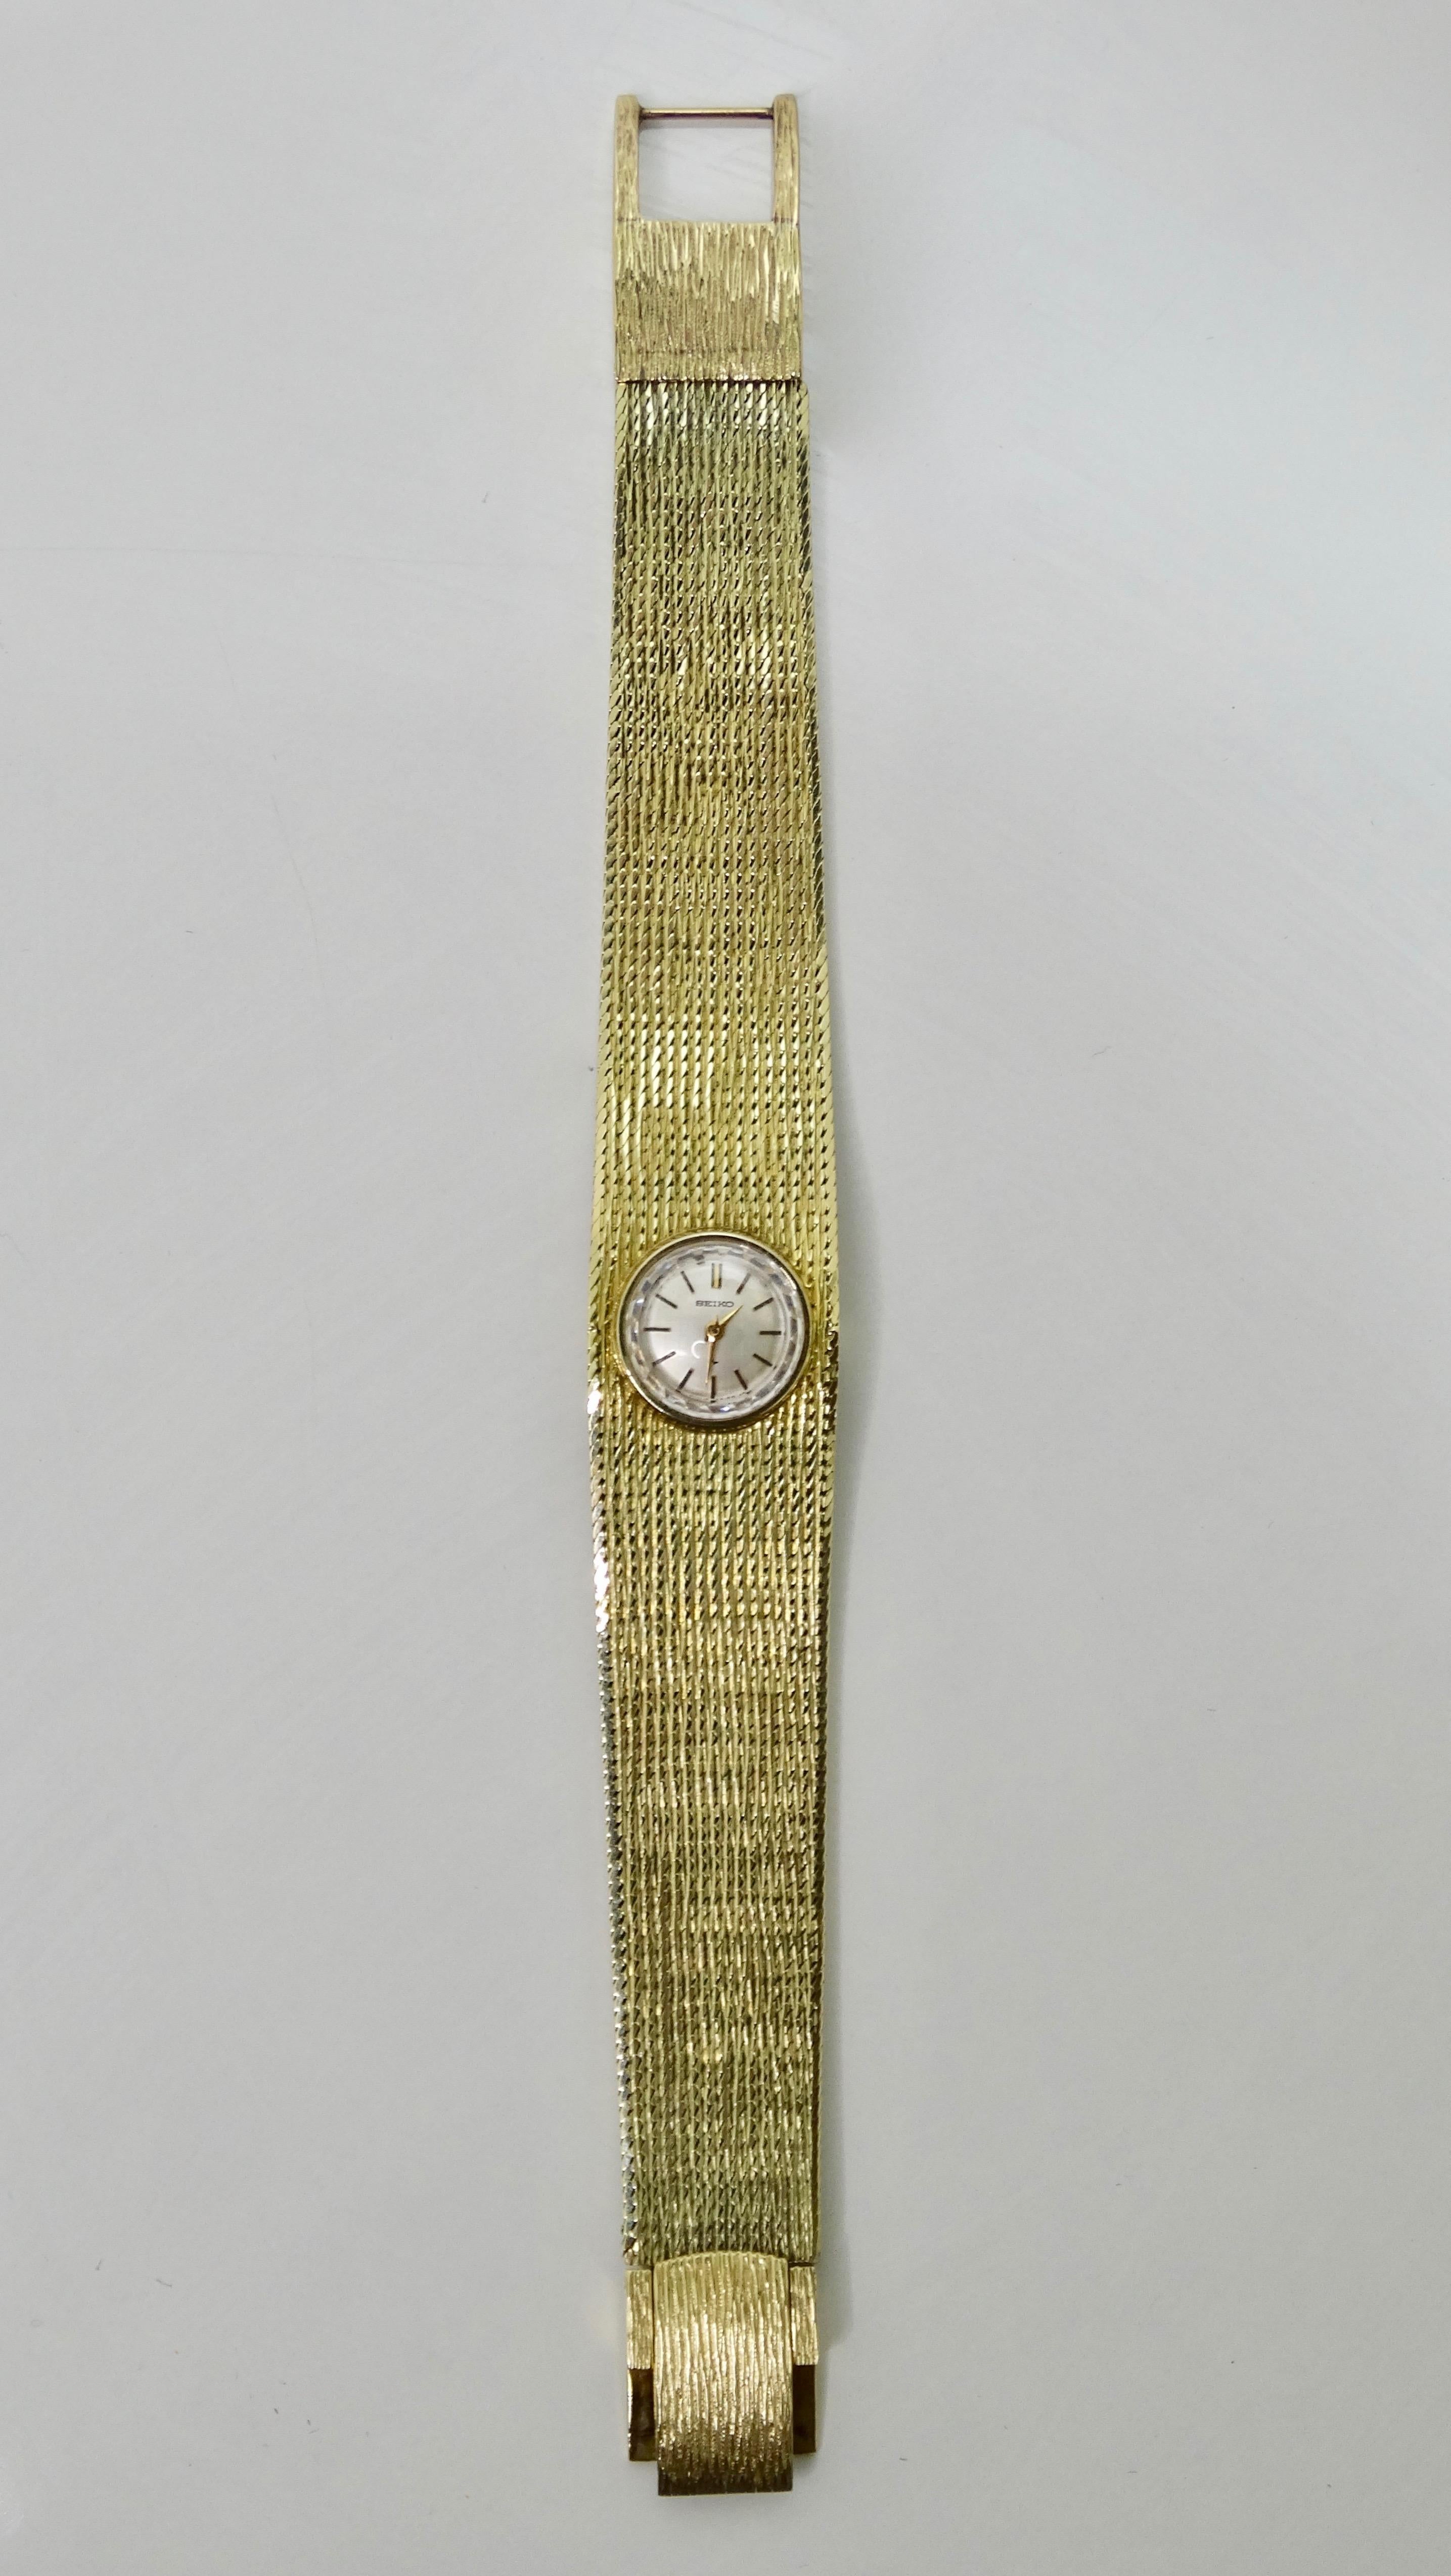 Snag yourself a new timepiece old school style! Circa mid-20th century, this Seiko wrist watch is crafted from 14k Gold and features a 10mm circular face, flexible textured band, and quartz movement. Has a clasp closure and will fit a 7